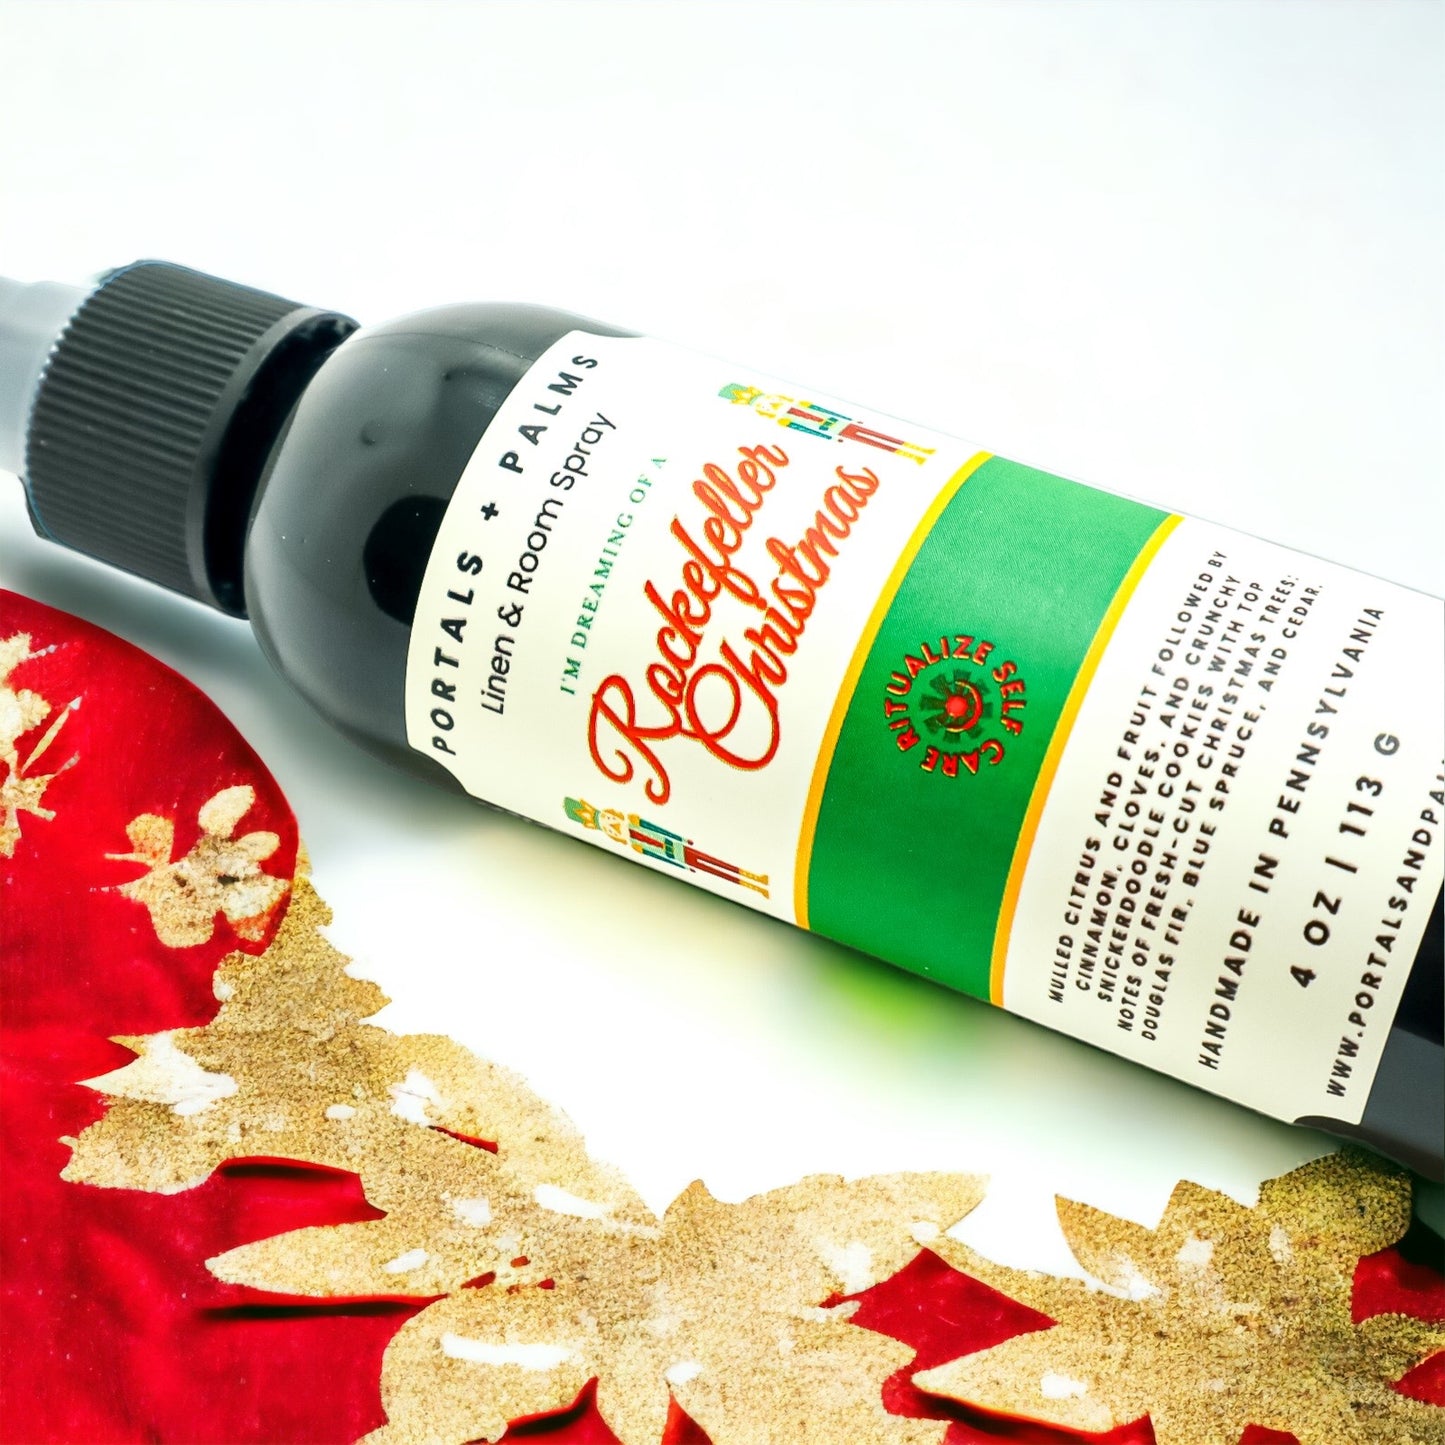 Linen & Room Spray “I’m Dreaming Of A Rockefeller Christmas” Limited scent